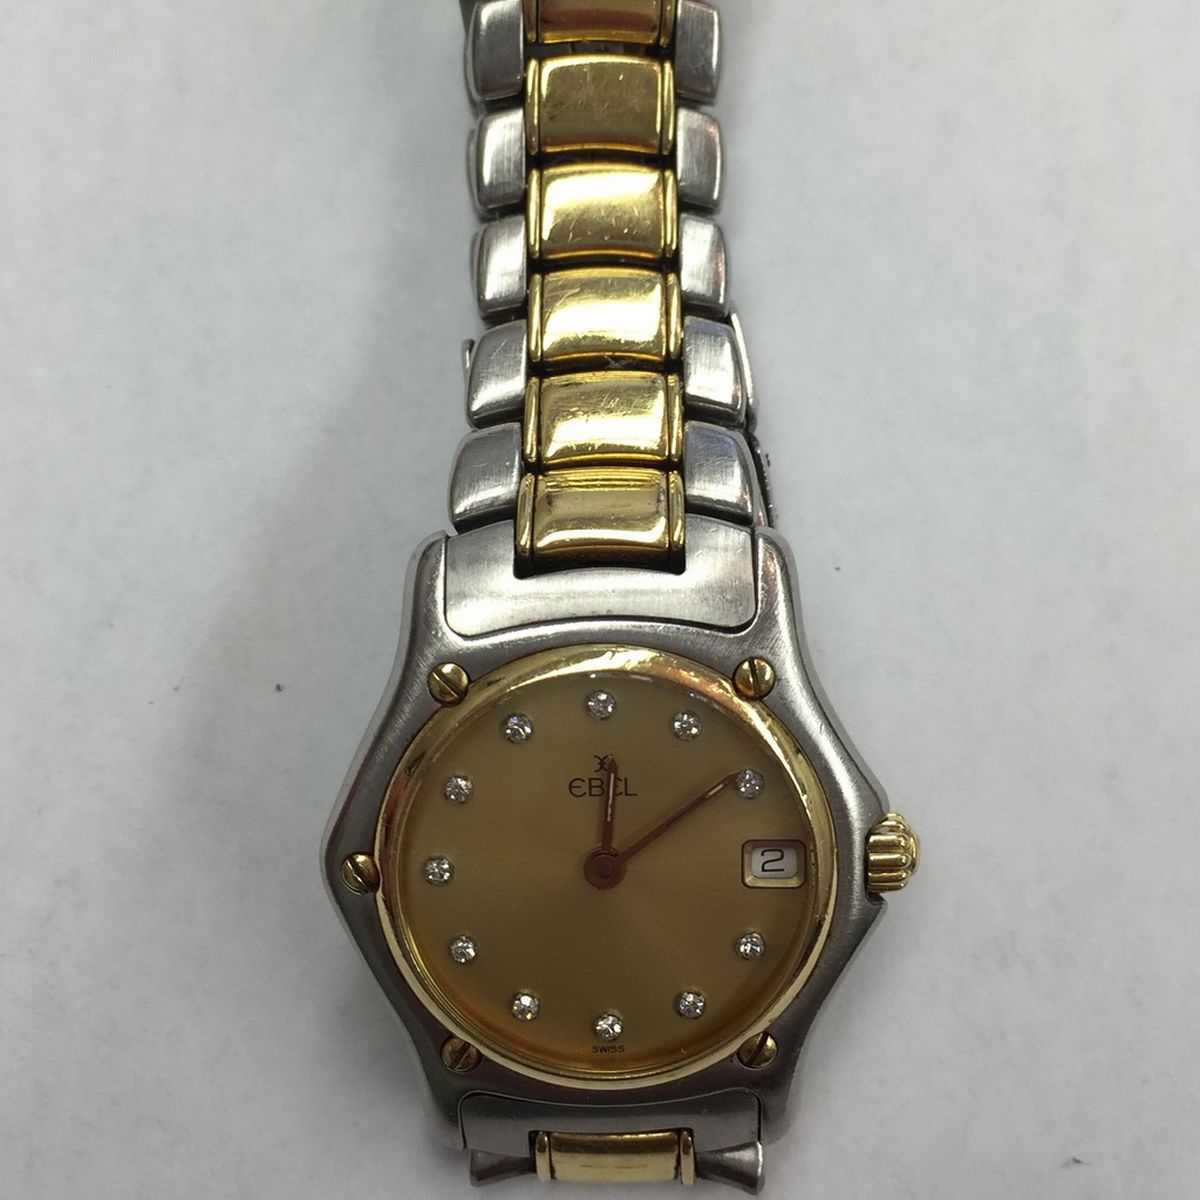 Village Watch Center Repairs & Sells New & Used Ebel Watches